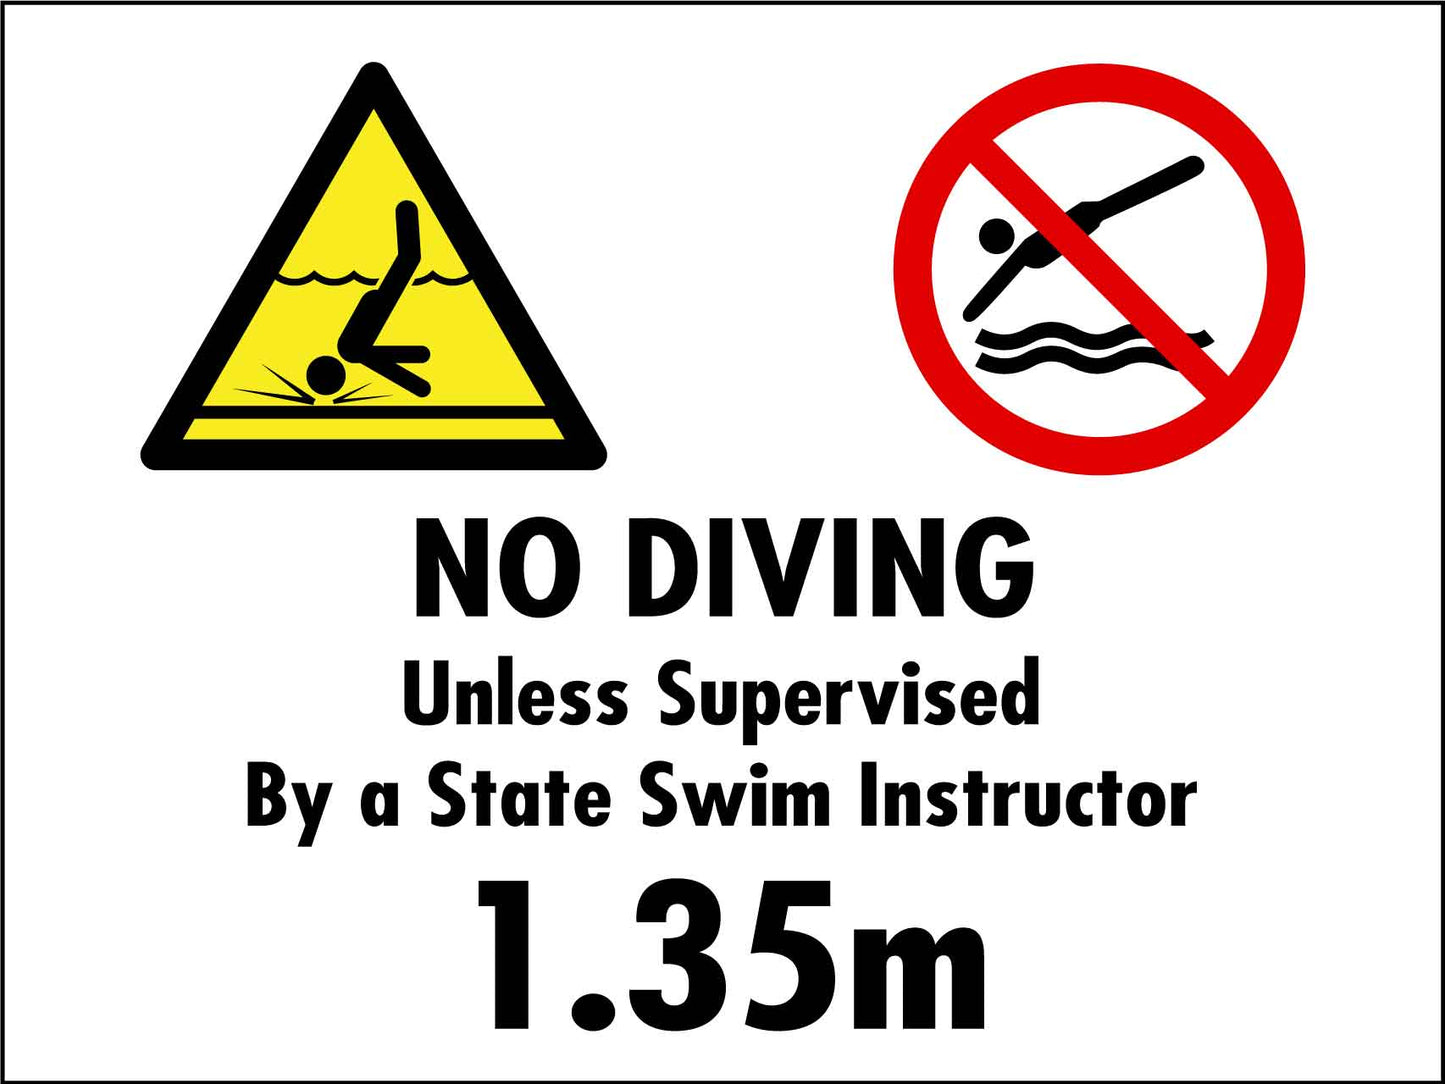 NO DIVING unless supervised by a State Swim Instructor